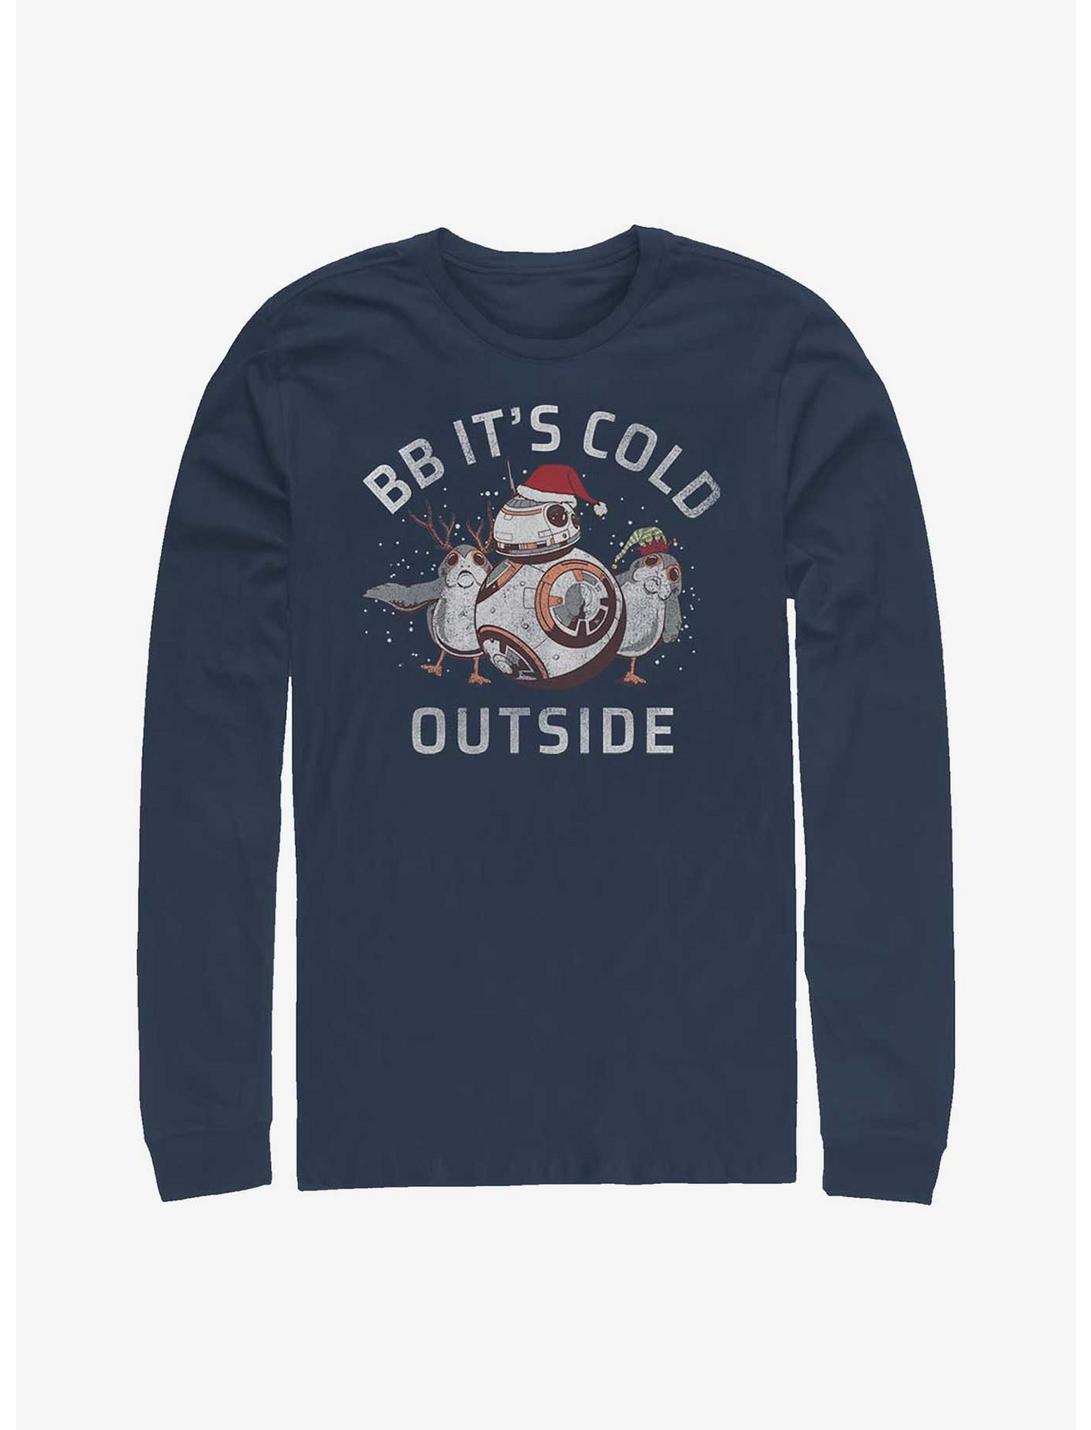 Star Wars BB It's Cold Outside Long-Sleeve T-Shirt, NAVY, hi-res